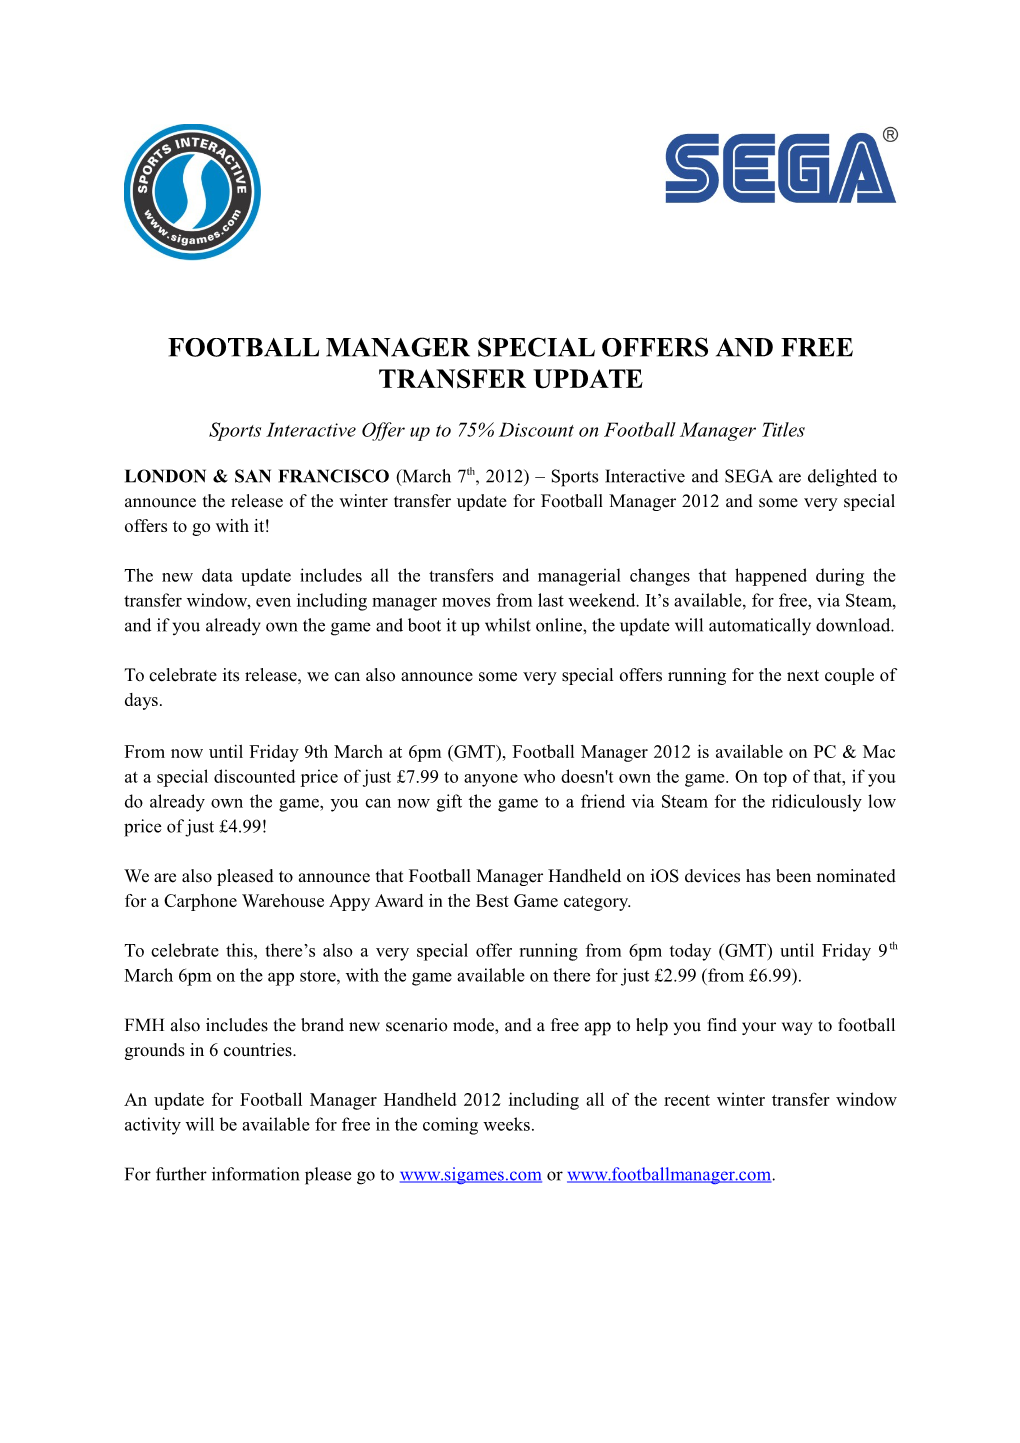 Football Manager Special Offers and Free Transfer Update